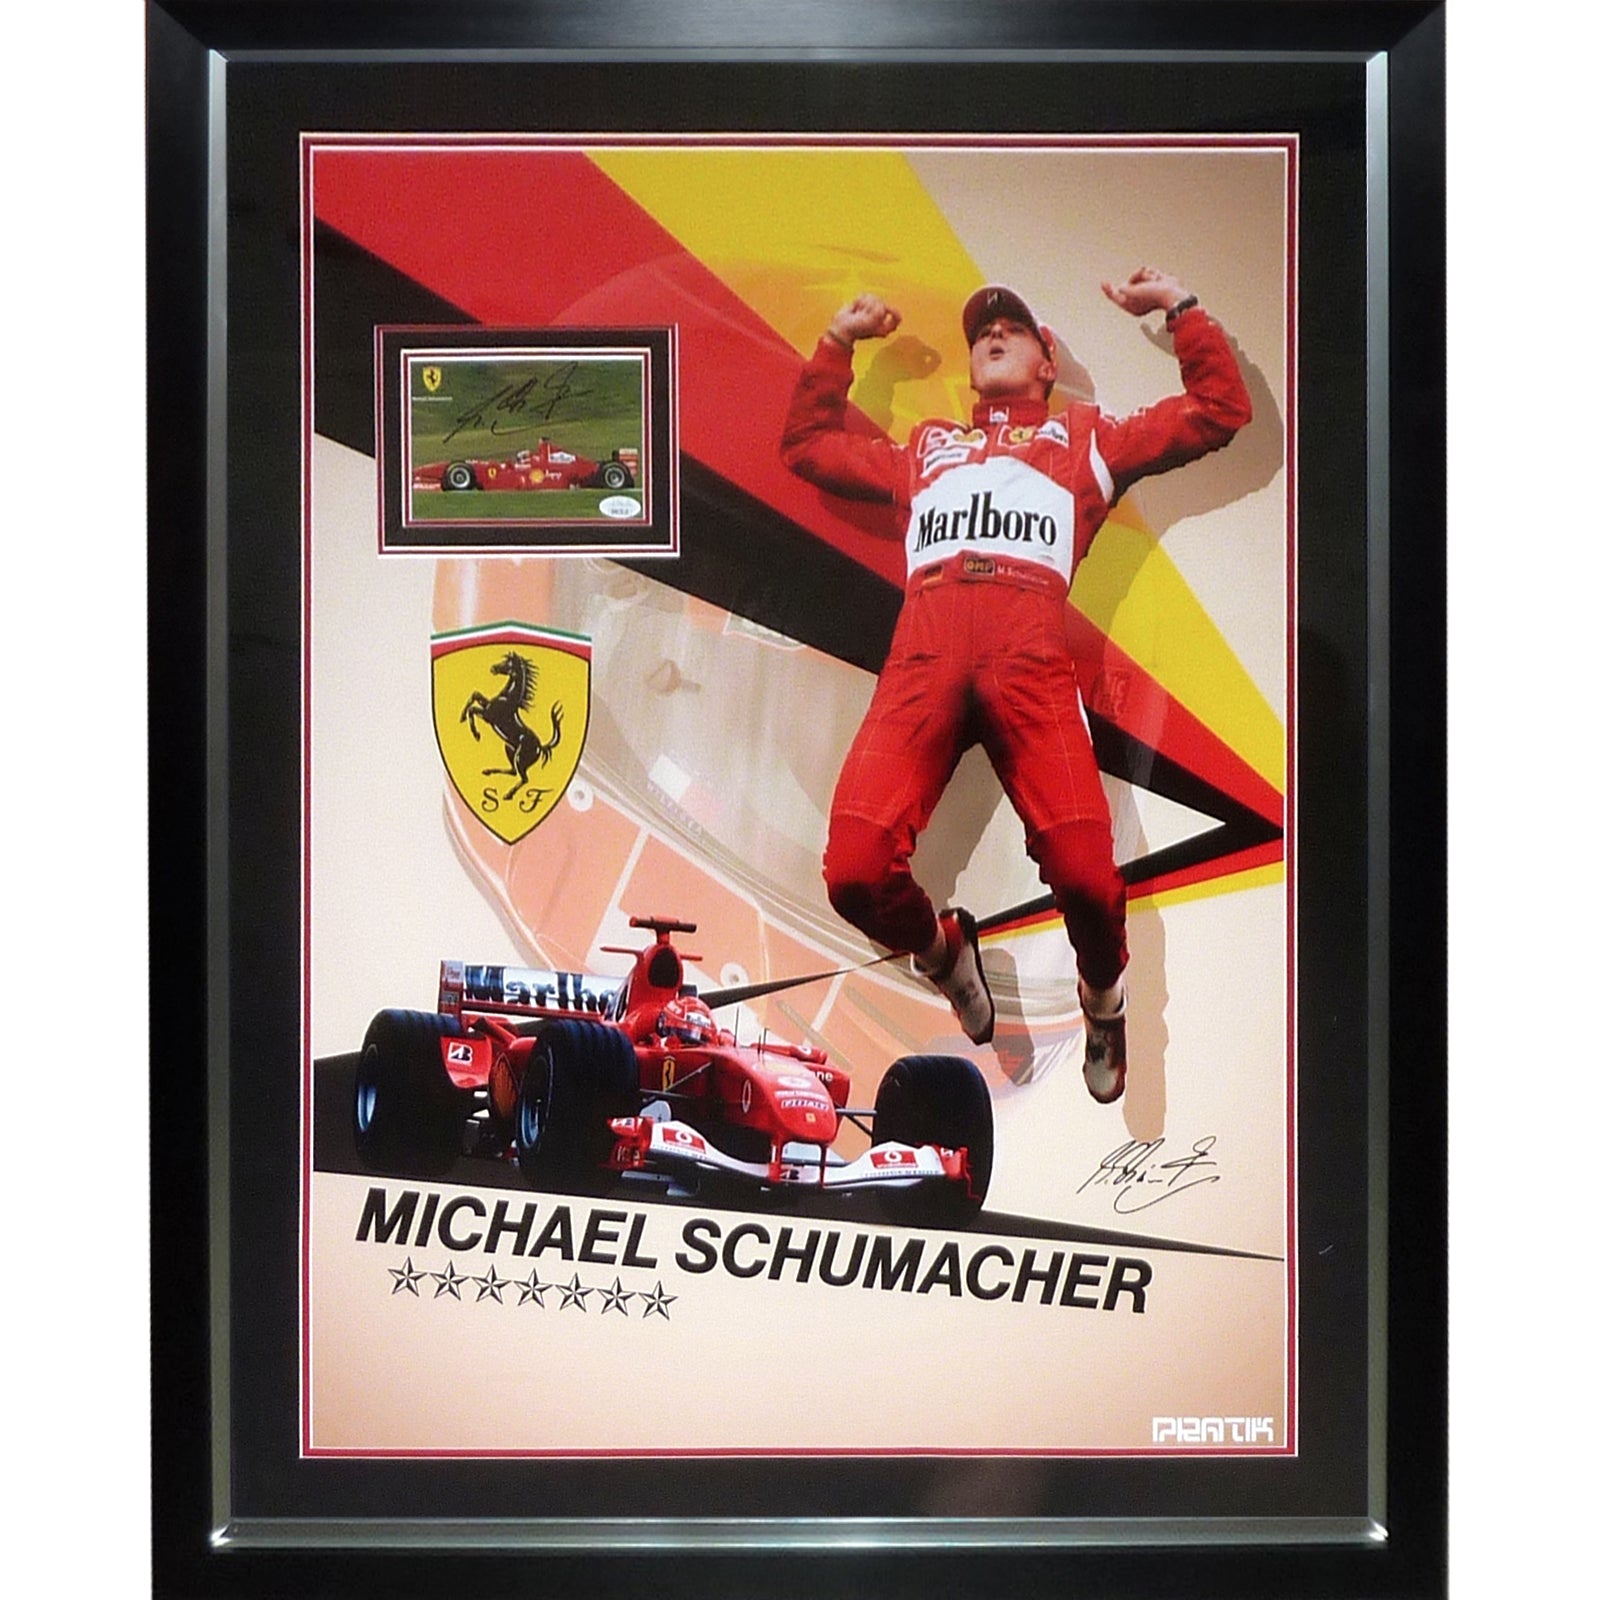 Michael Schumacher Autographed Formula One Deluxe Framed Poster with Signature - JSA